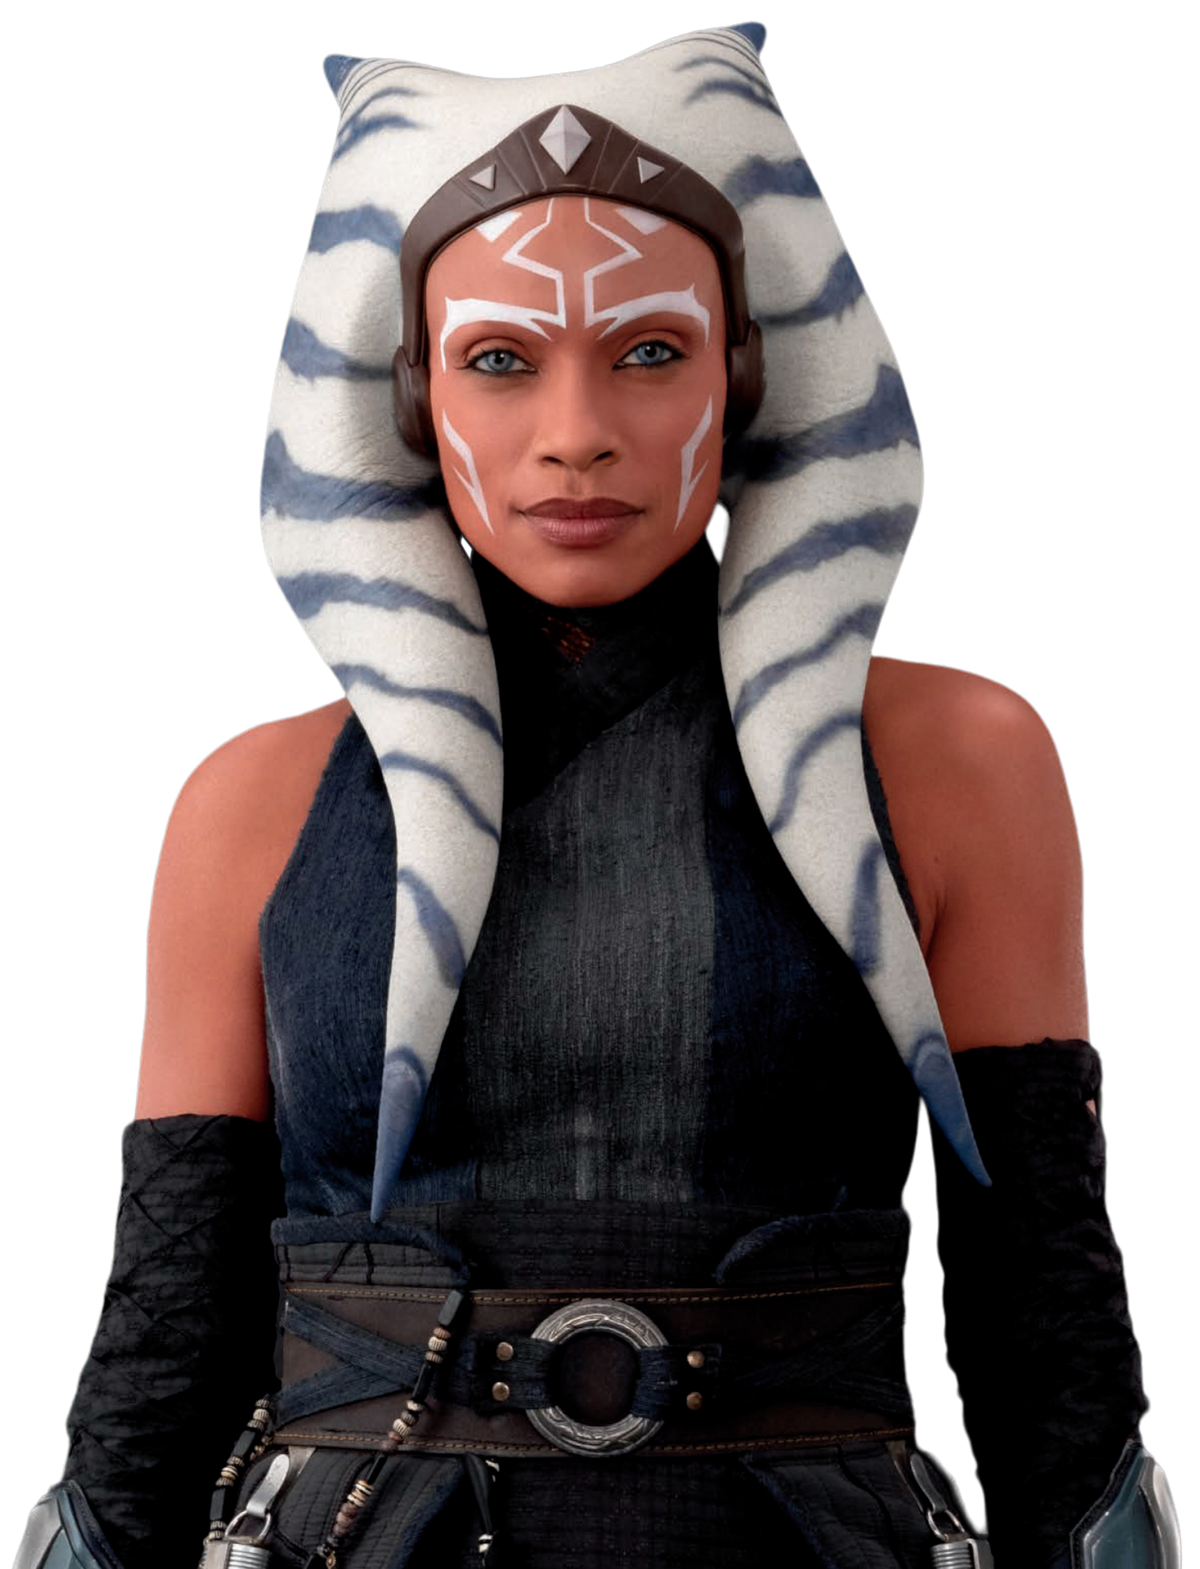 https://static.wikia.nocookie.net/starwars/images/2/27/Ahsoka-Tano-AG-2023.png/revision/latest/scale-to-width-down/1200?cb=20231009063143